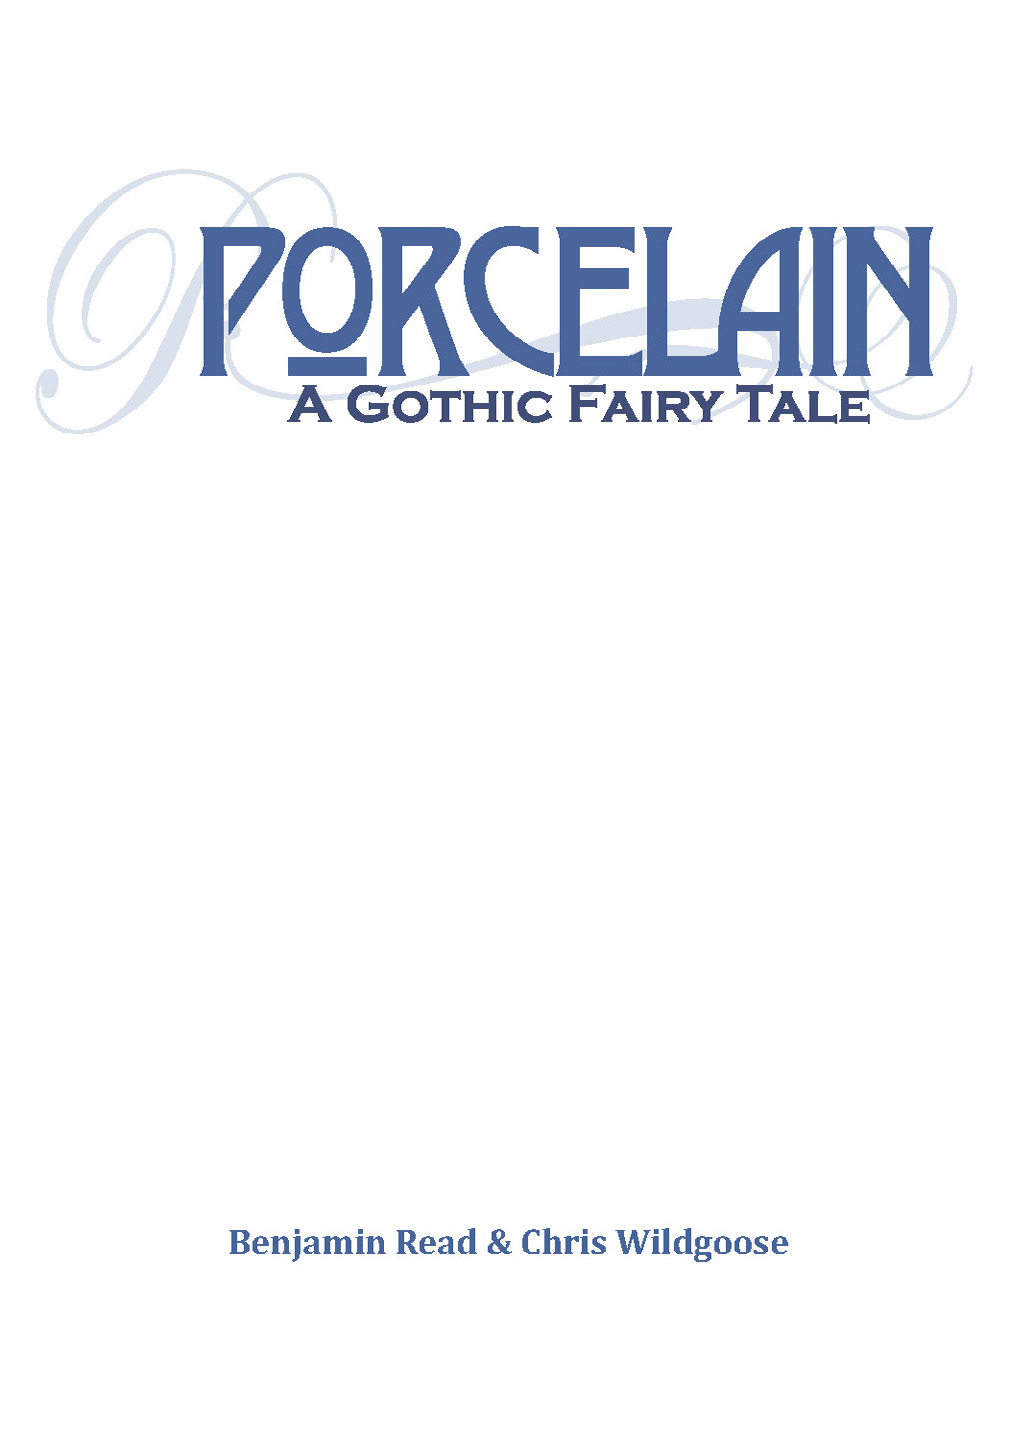 Read online Porcelain: A Gothic Fairy Tale comic -  Issue # TPB - 2